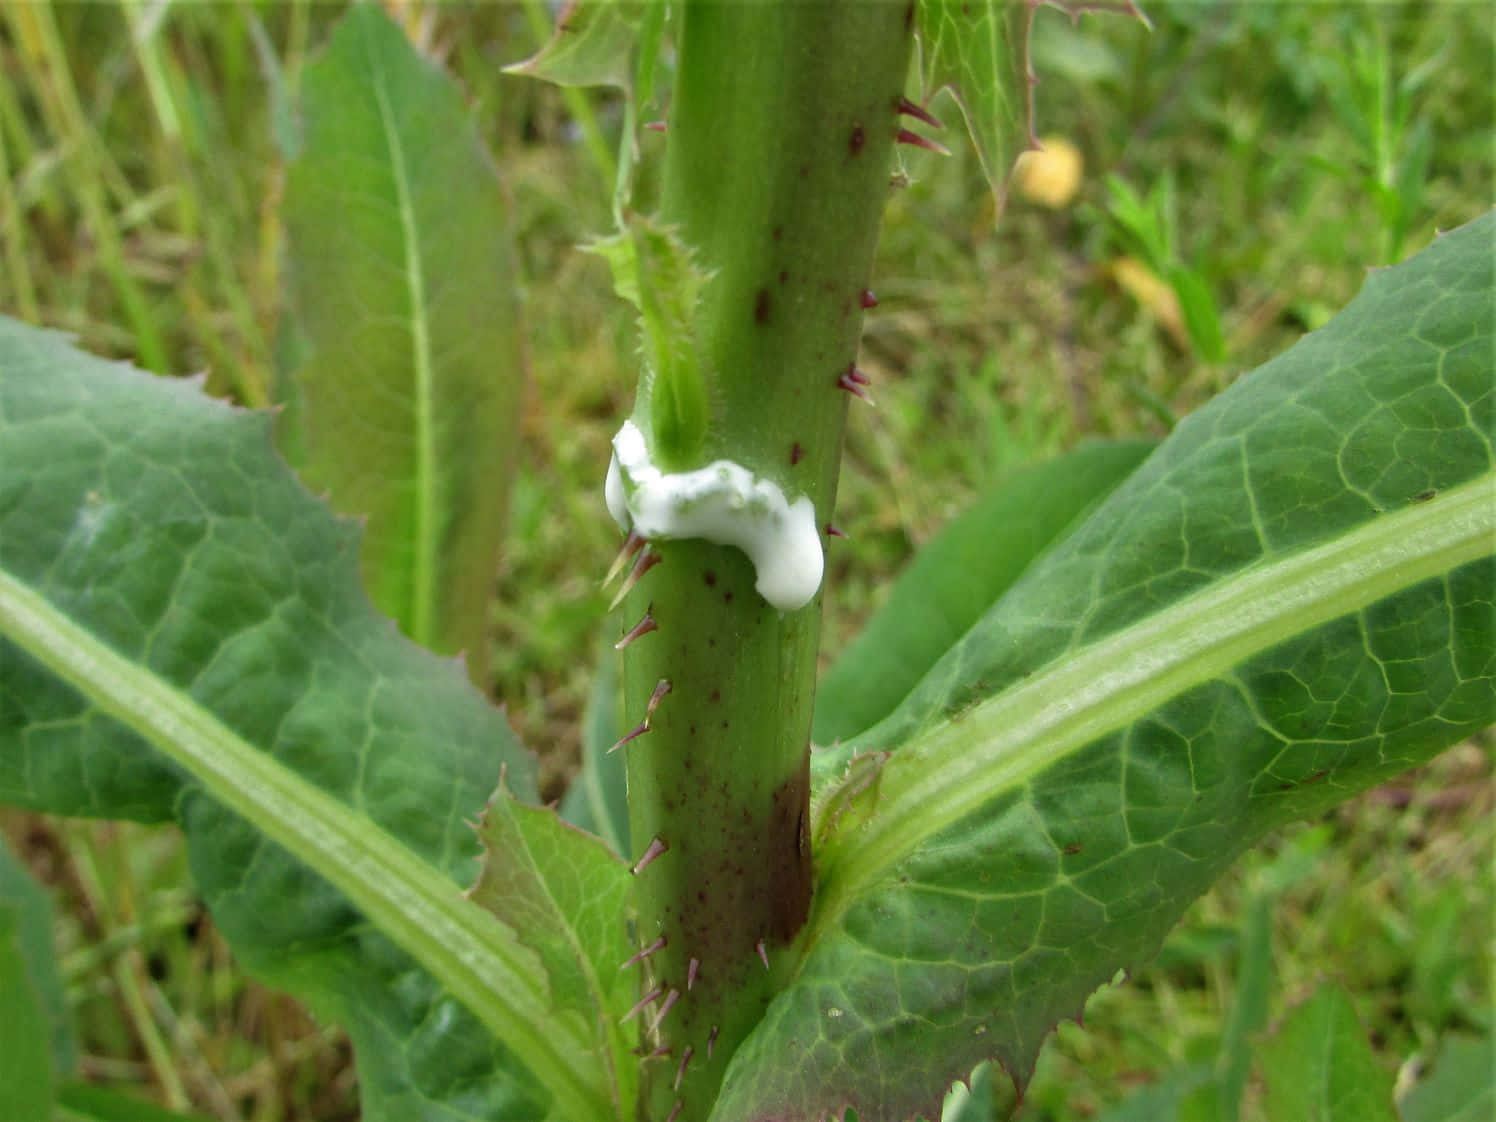 A White Smear On The Stem Of A Plant